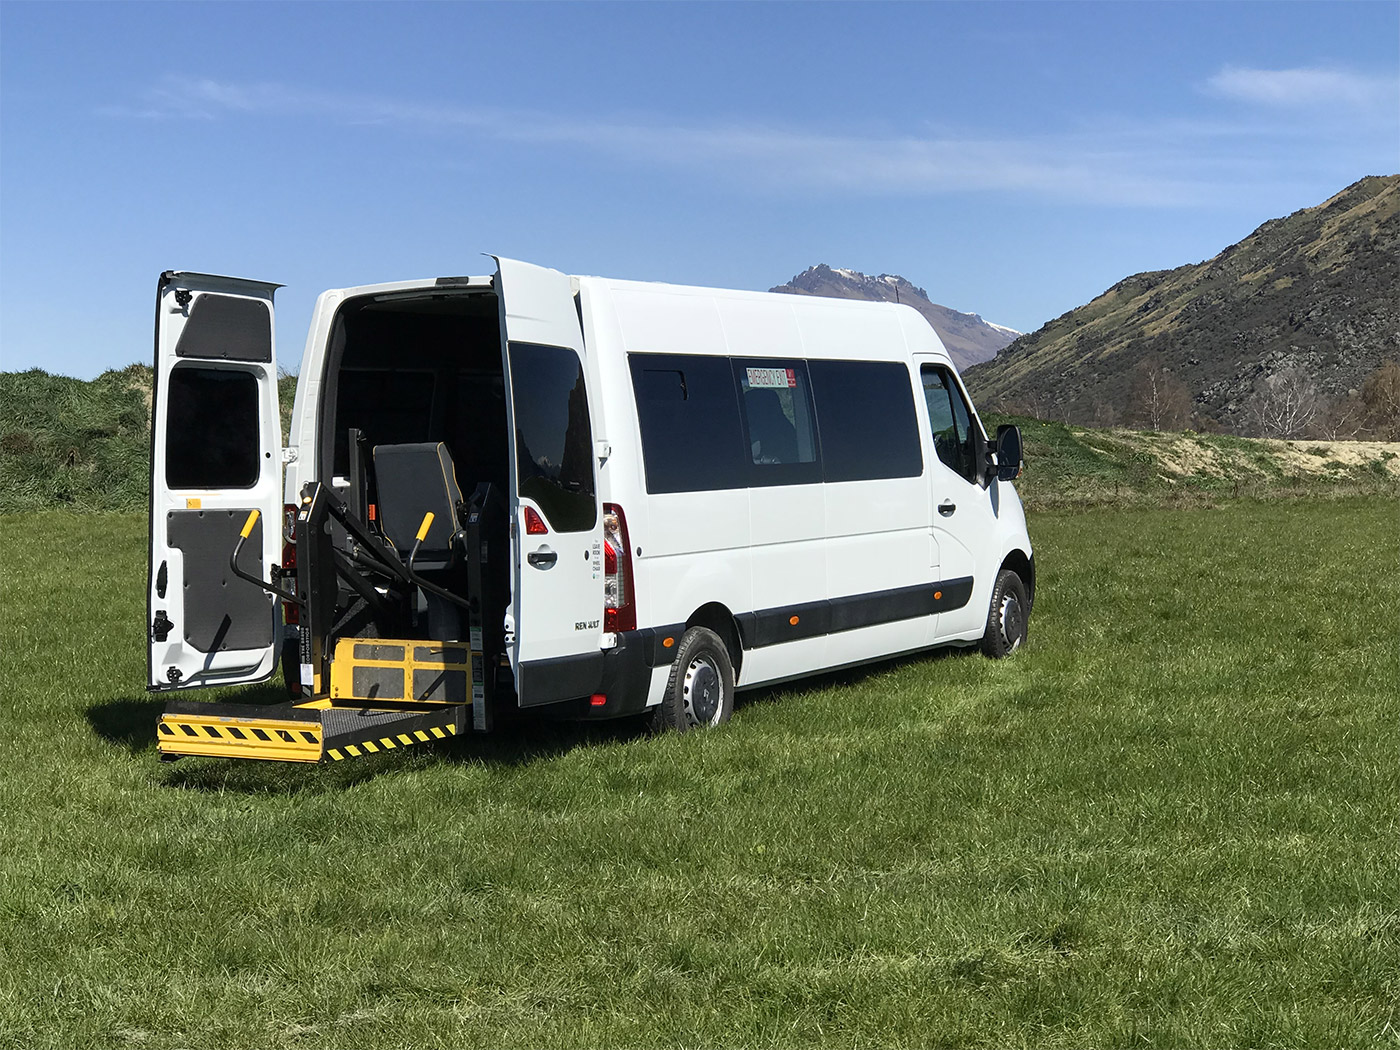 mobility parking service - Visiting NZ